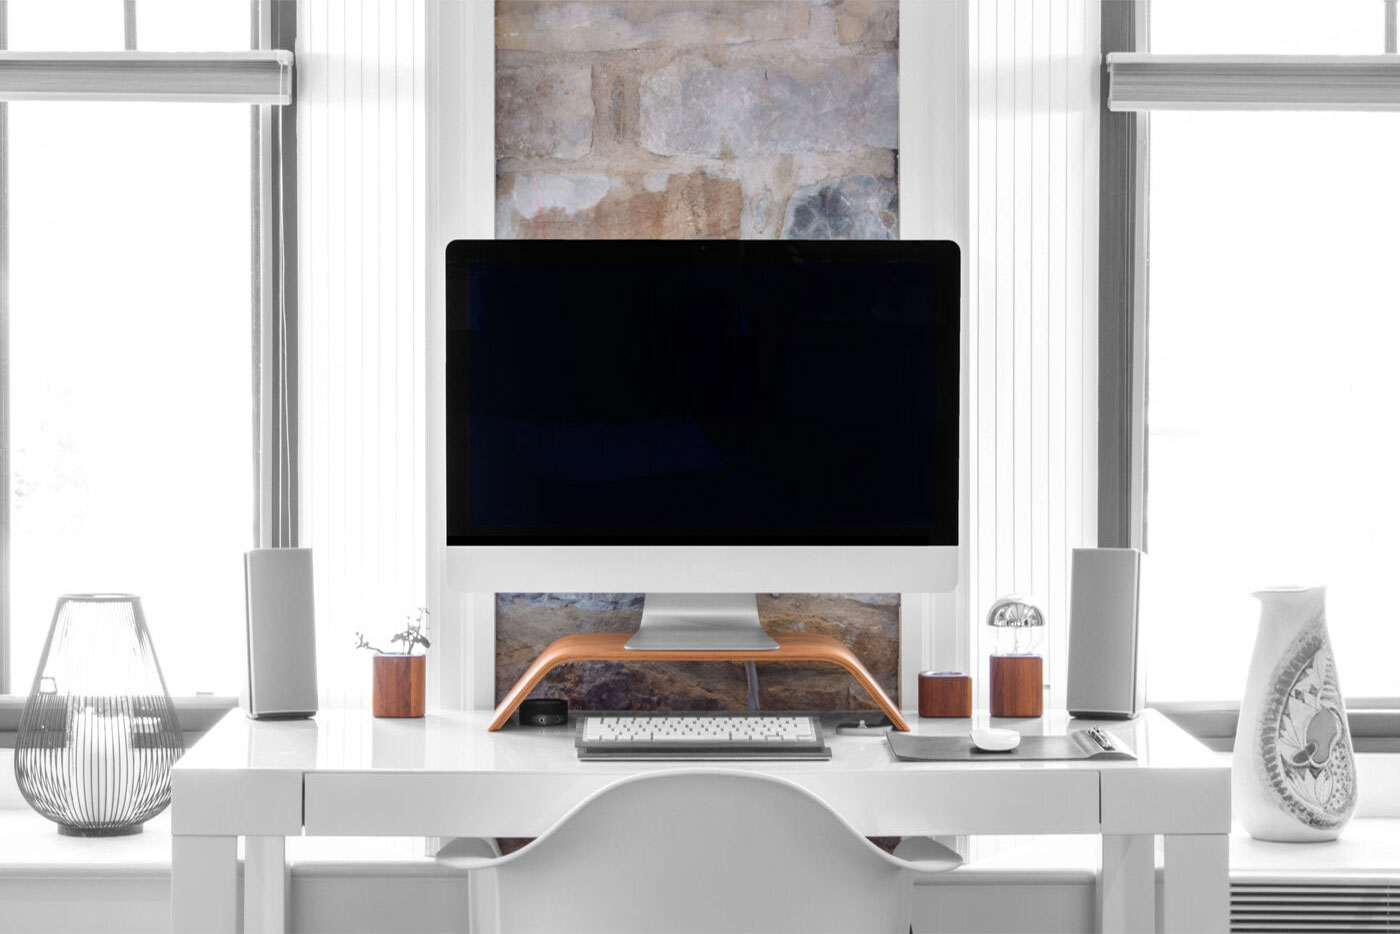 Hyper-realistic iMac on a Desk in a Room Front View Mockup FREE PSD